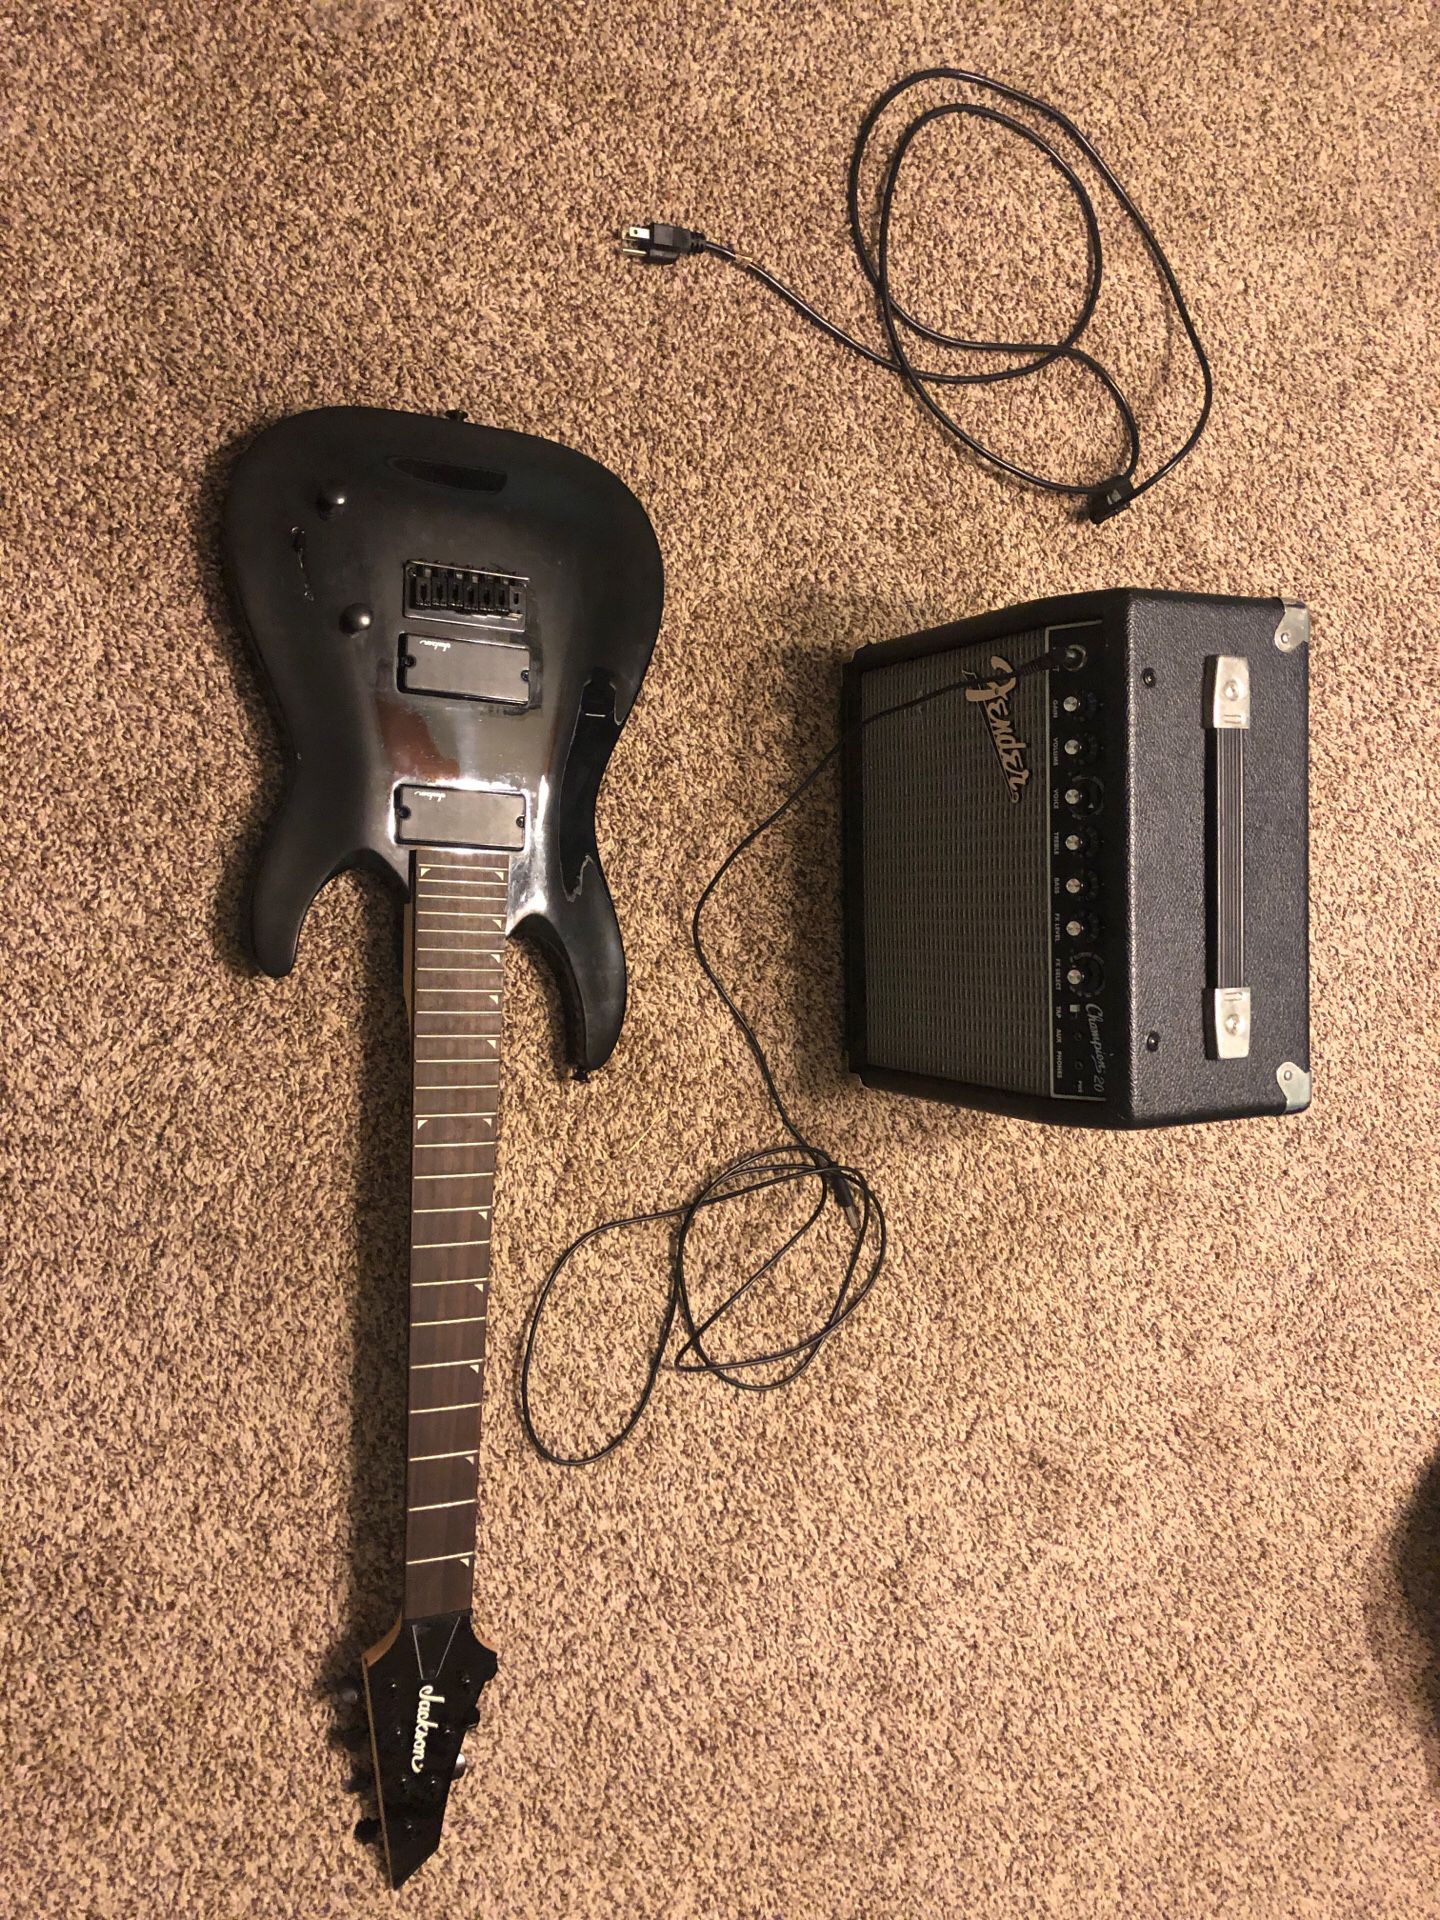 Jackson 7 string guitar and small fender amp (no strings on guitar and amp comes with power cable)